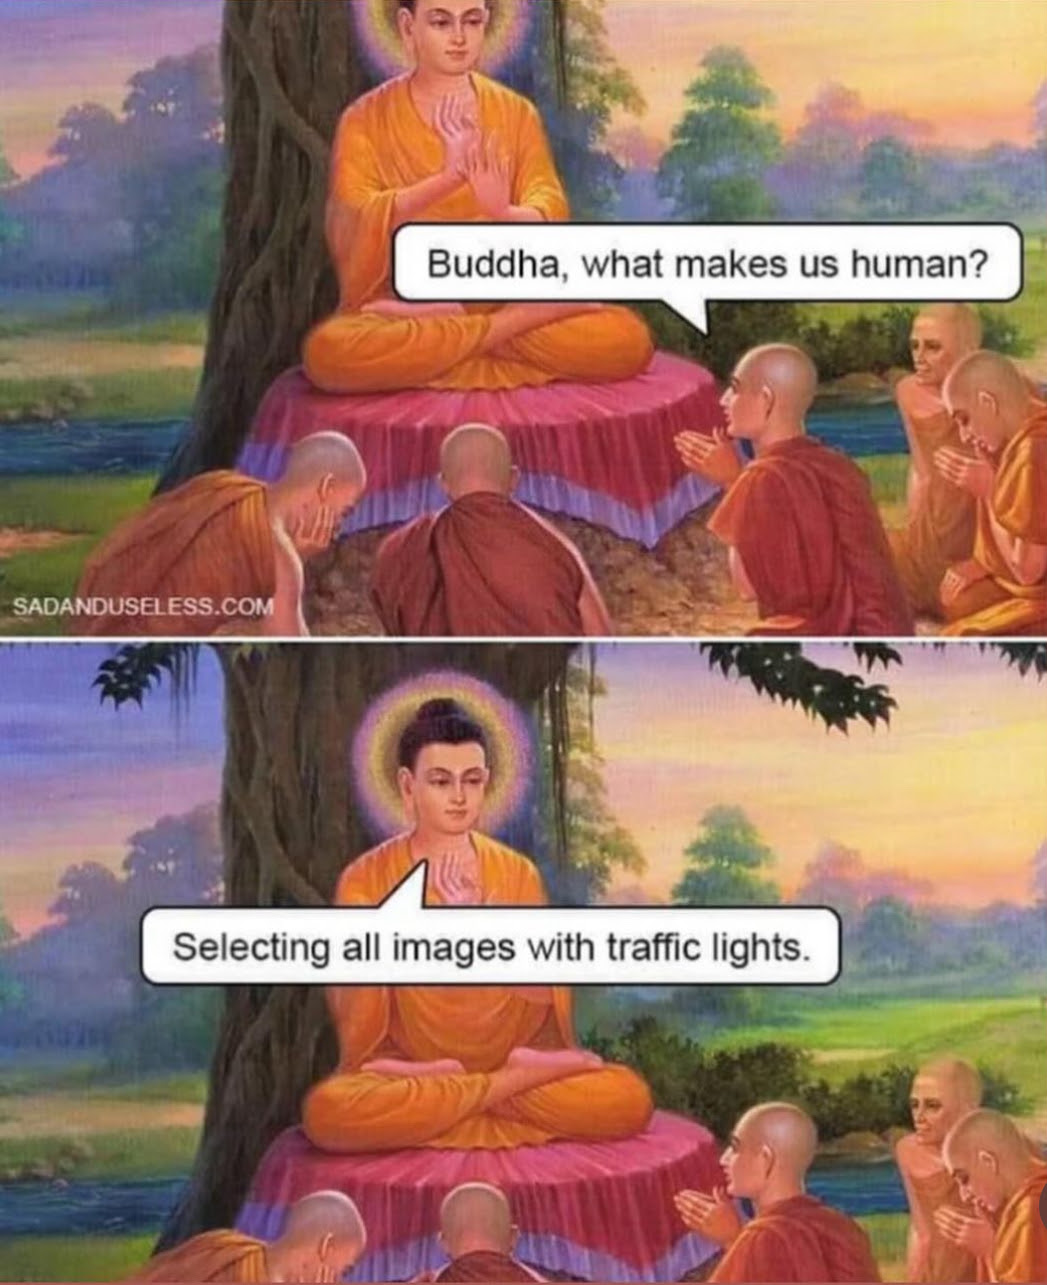 Buddha meme anseering question regarding what makes us human. The answer is answer which boxes contain traffic lights.